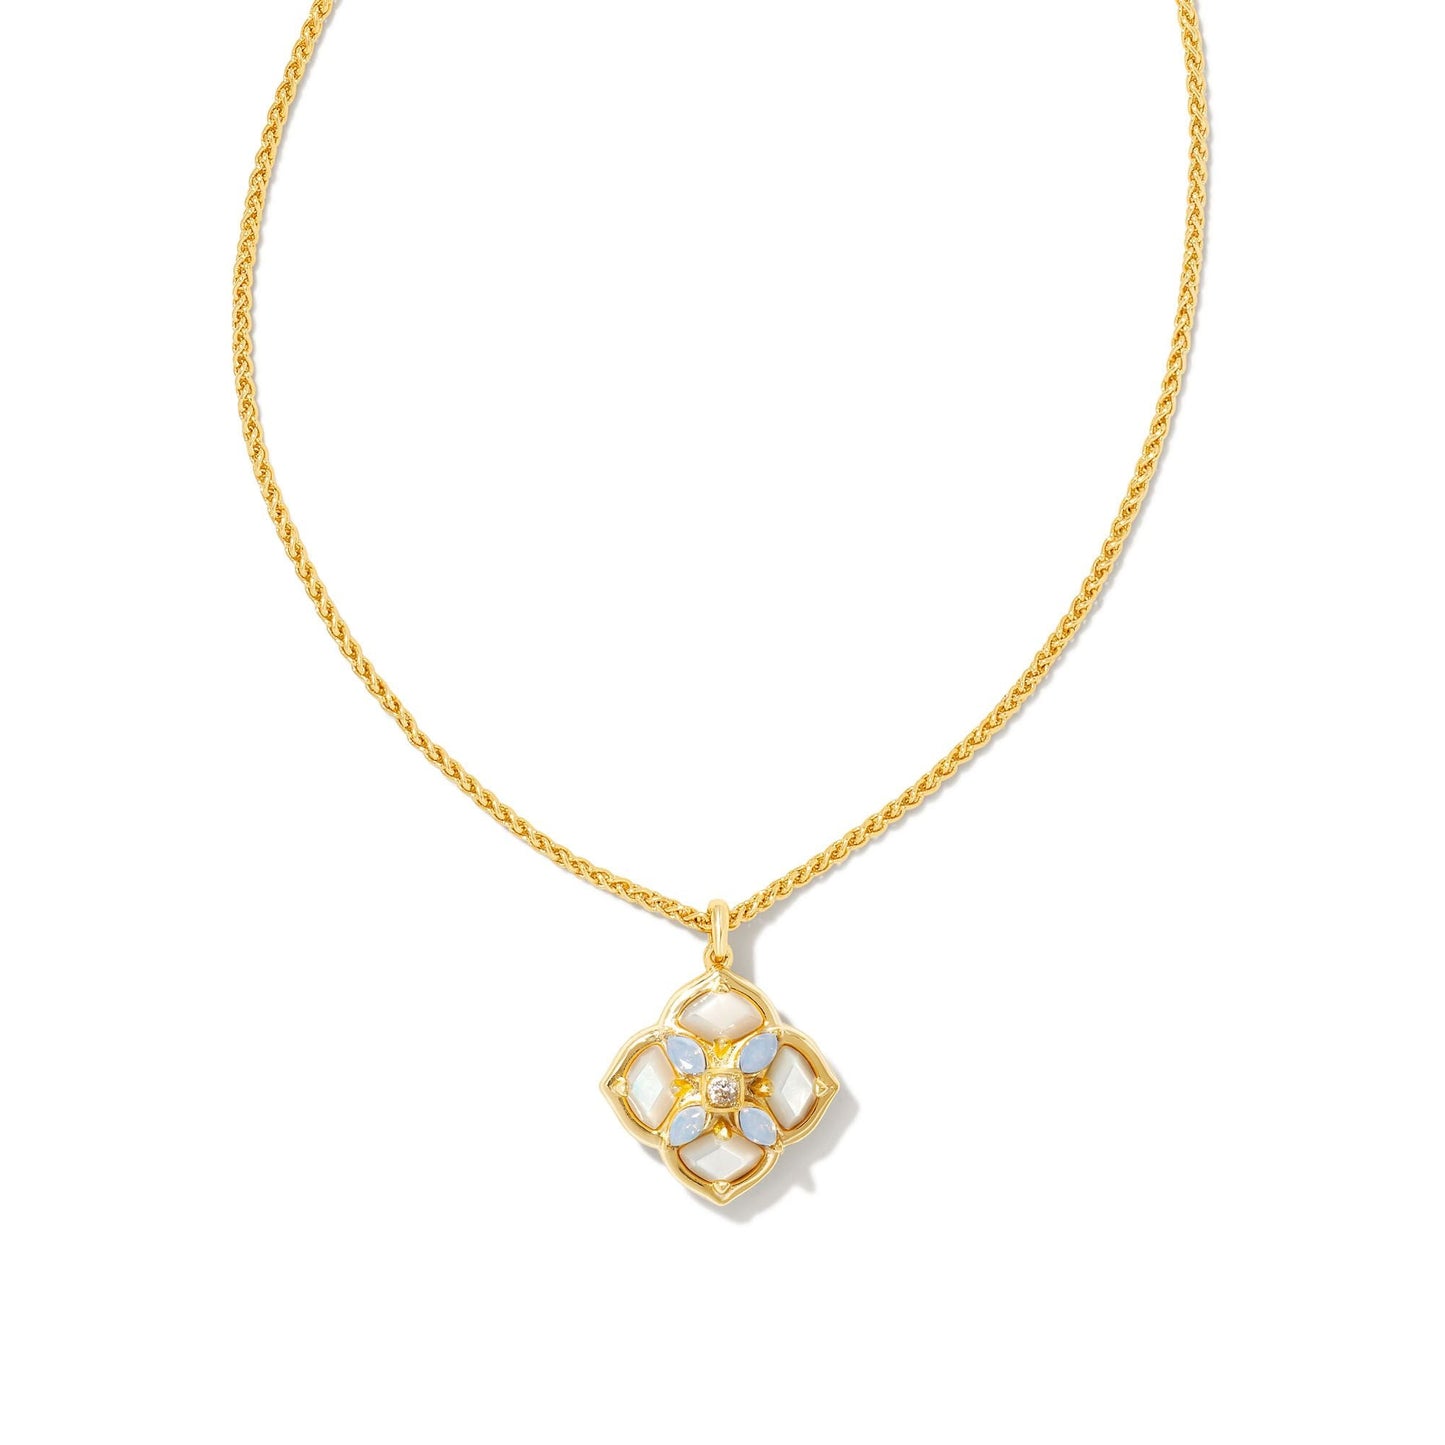 Dira Stone Pendant Necklace in Gold Ivory